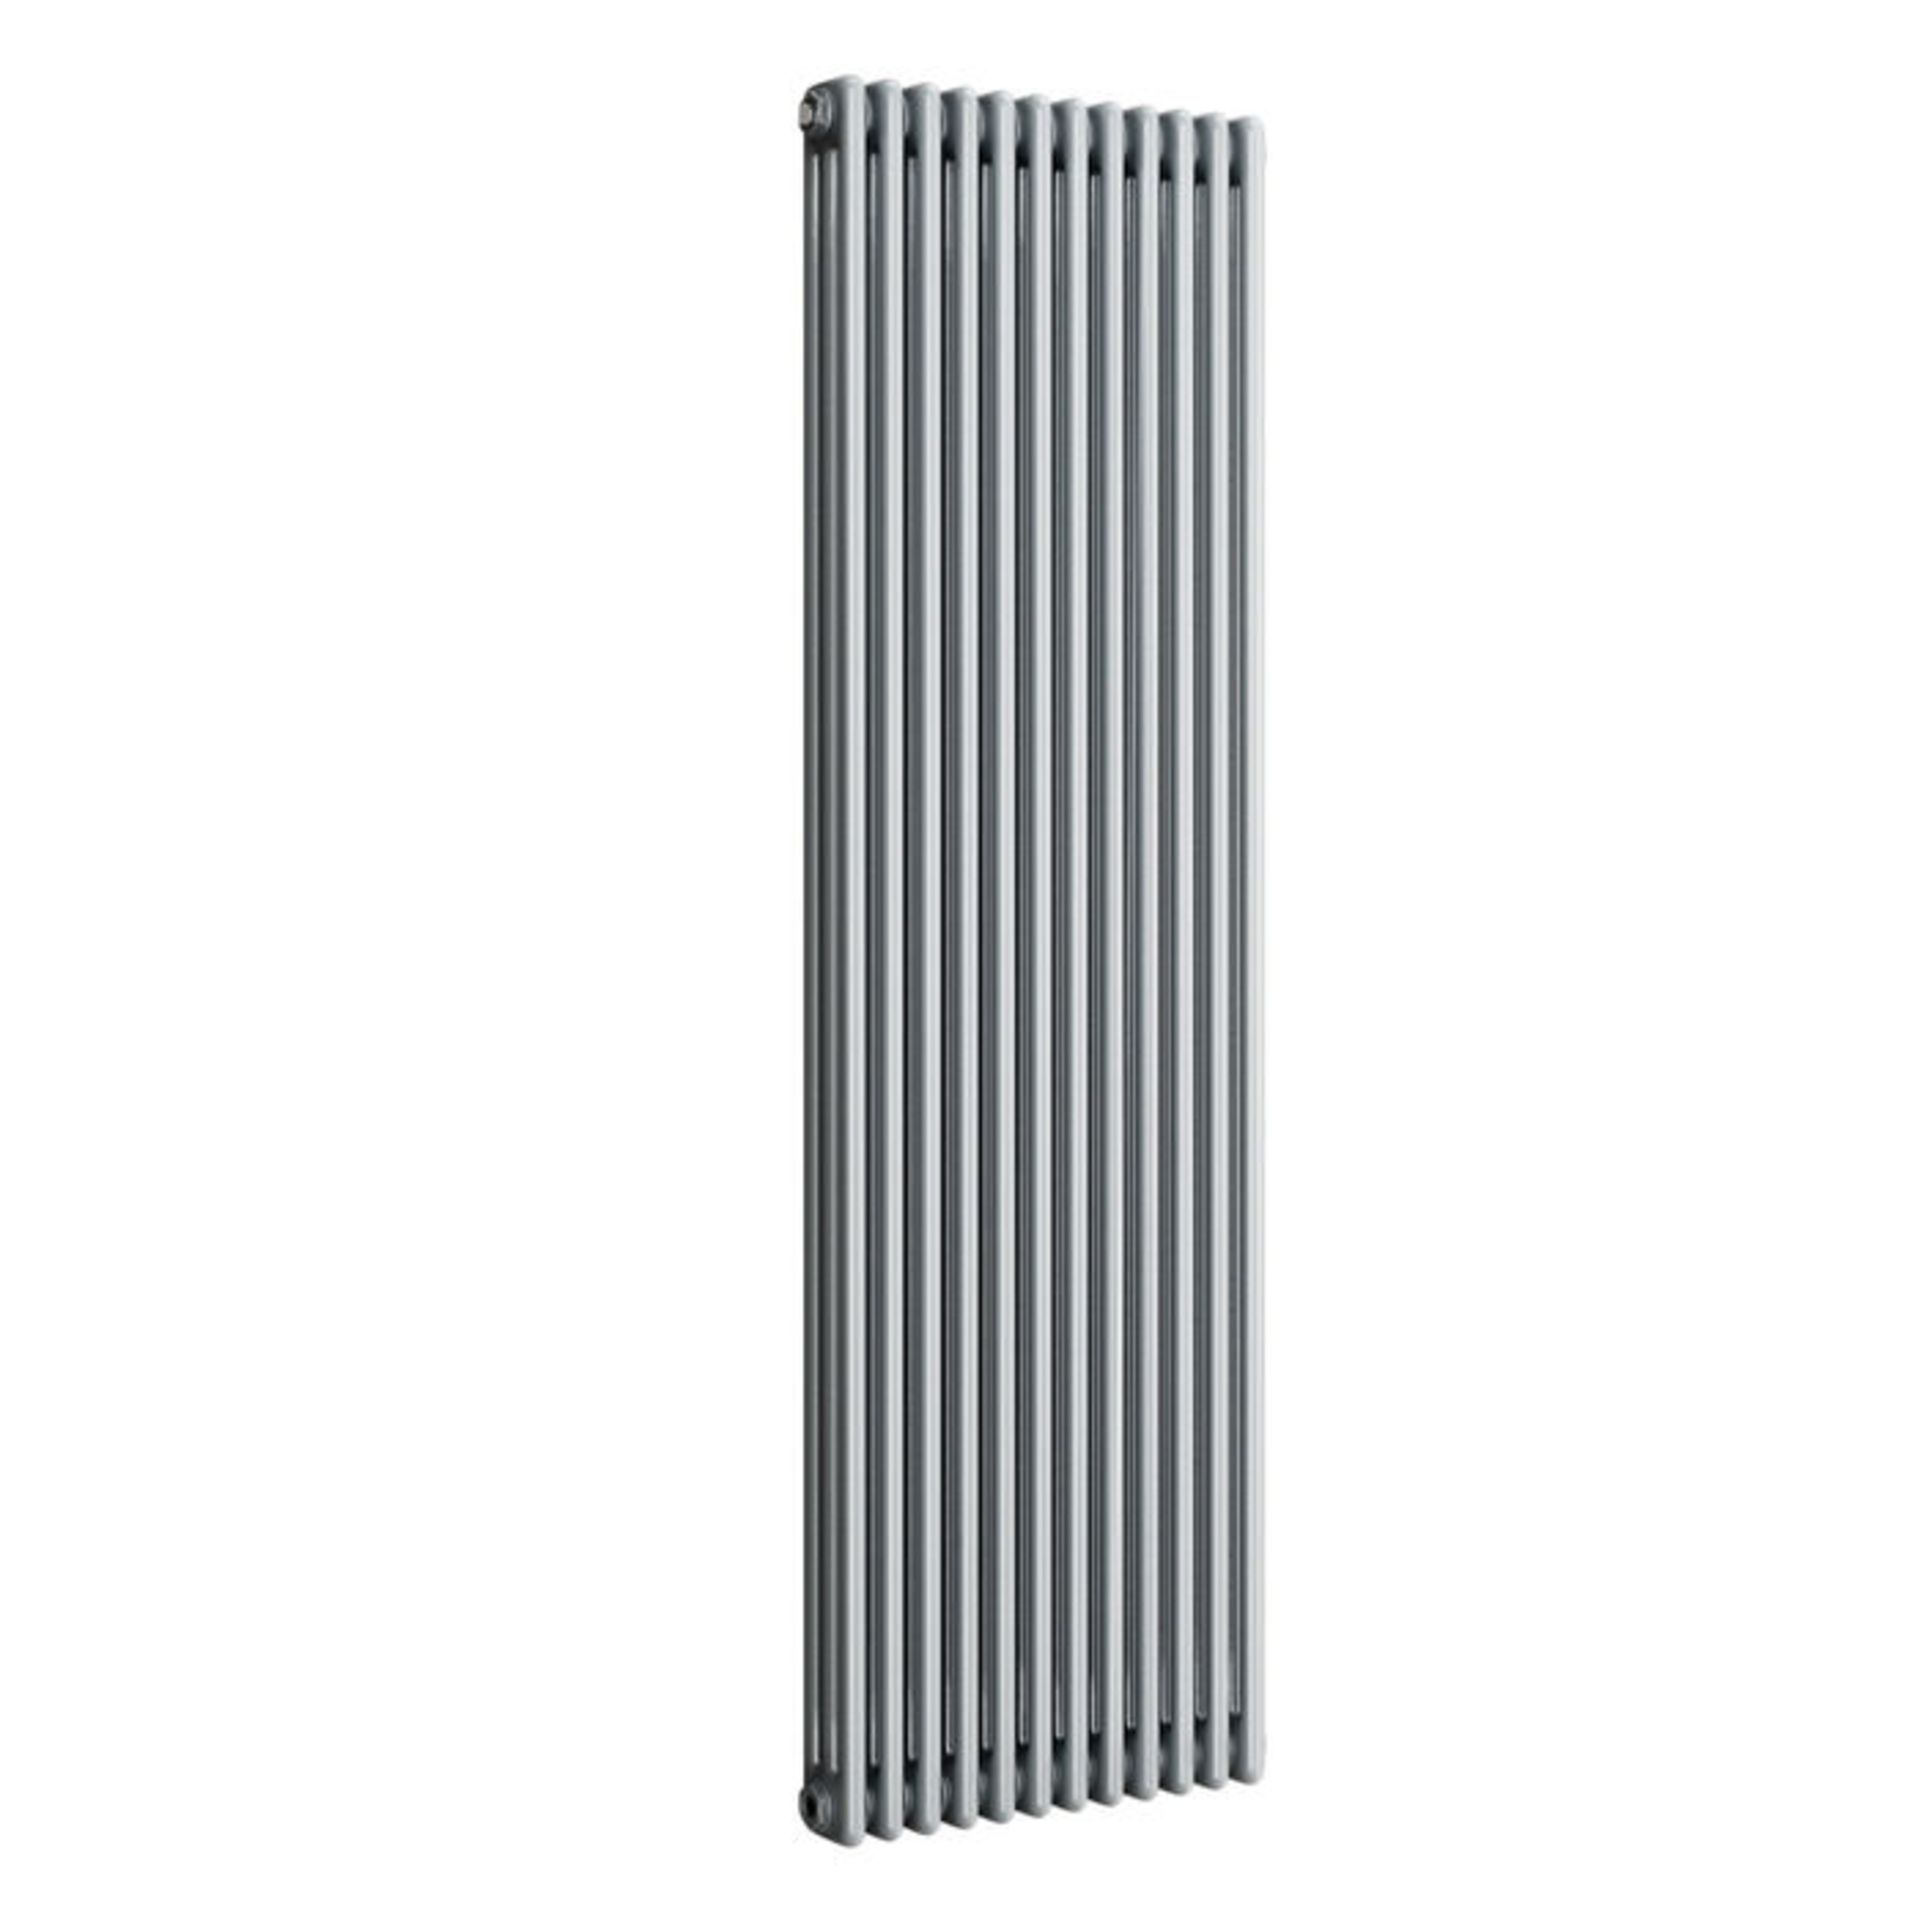 (XM74) 1800x554mm Earl Grey Triple Panel Vertical ColosseumTraditional Radiator. RRP £554.99.Made - Image 4 of 4